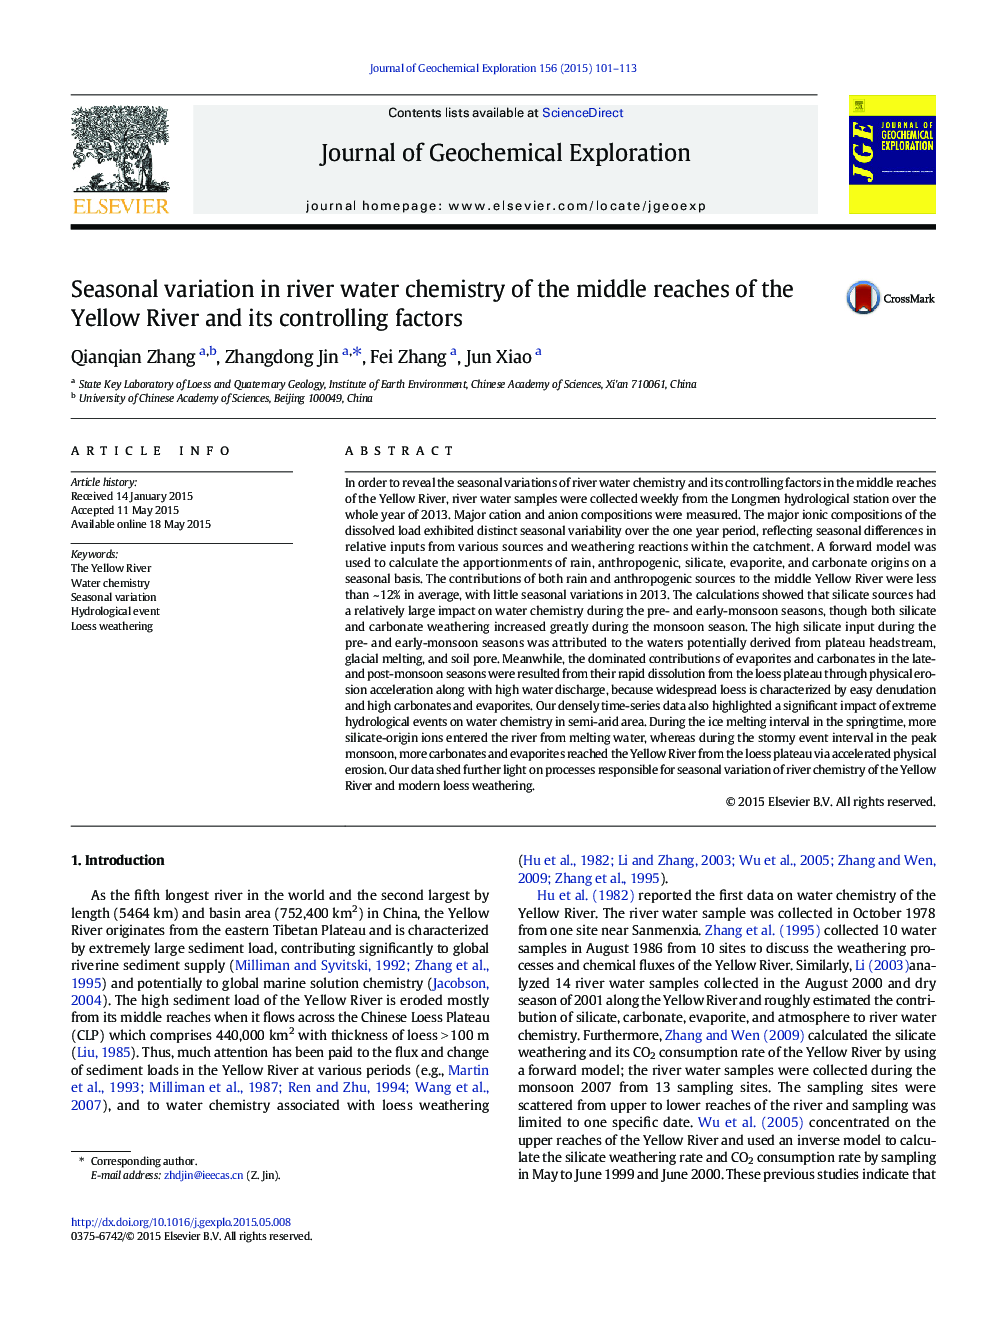 Seasonal variation in river water chemistry of the middle reaches of the Yellow River and its controlling factors